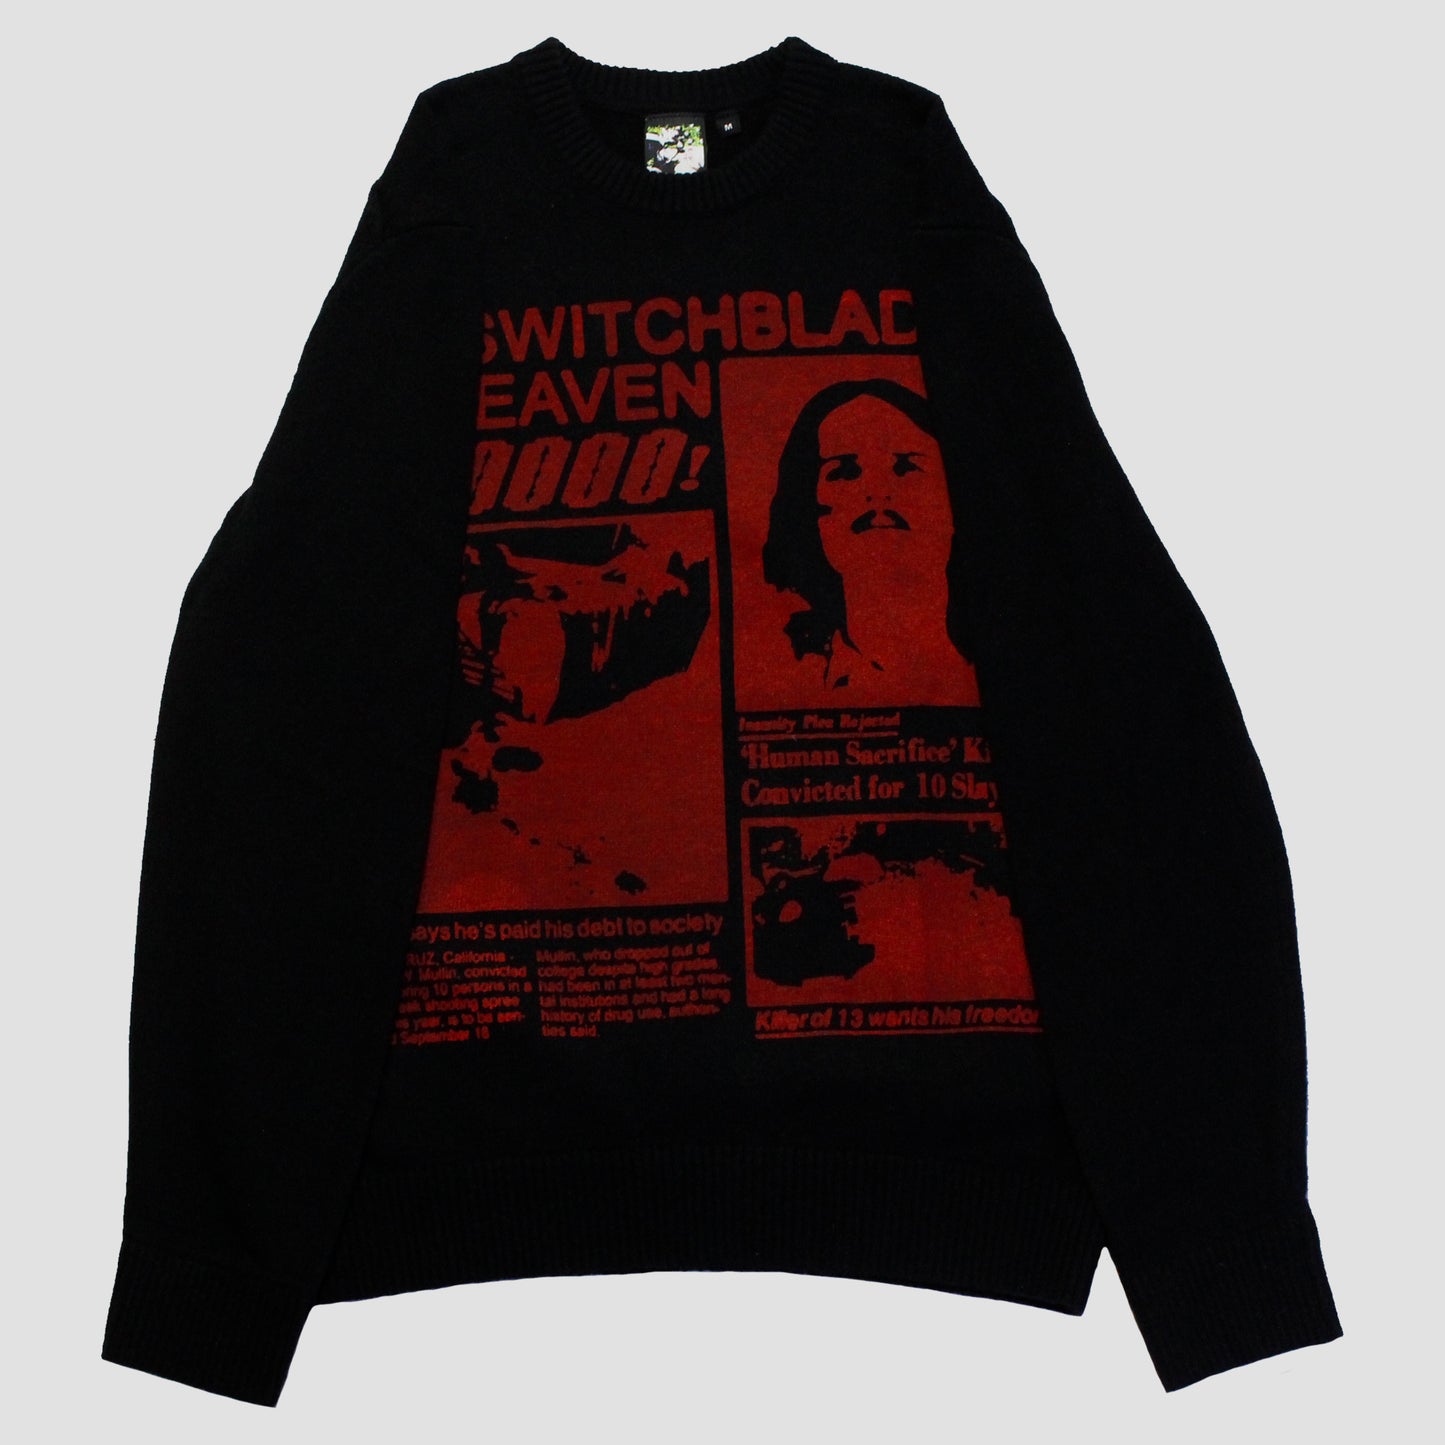 "NO SWITCHBLADES IN HEAVEN" Heavyweight Pullover Sweater (M)